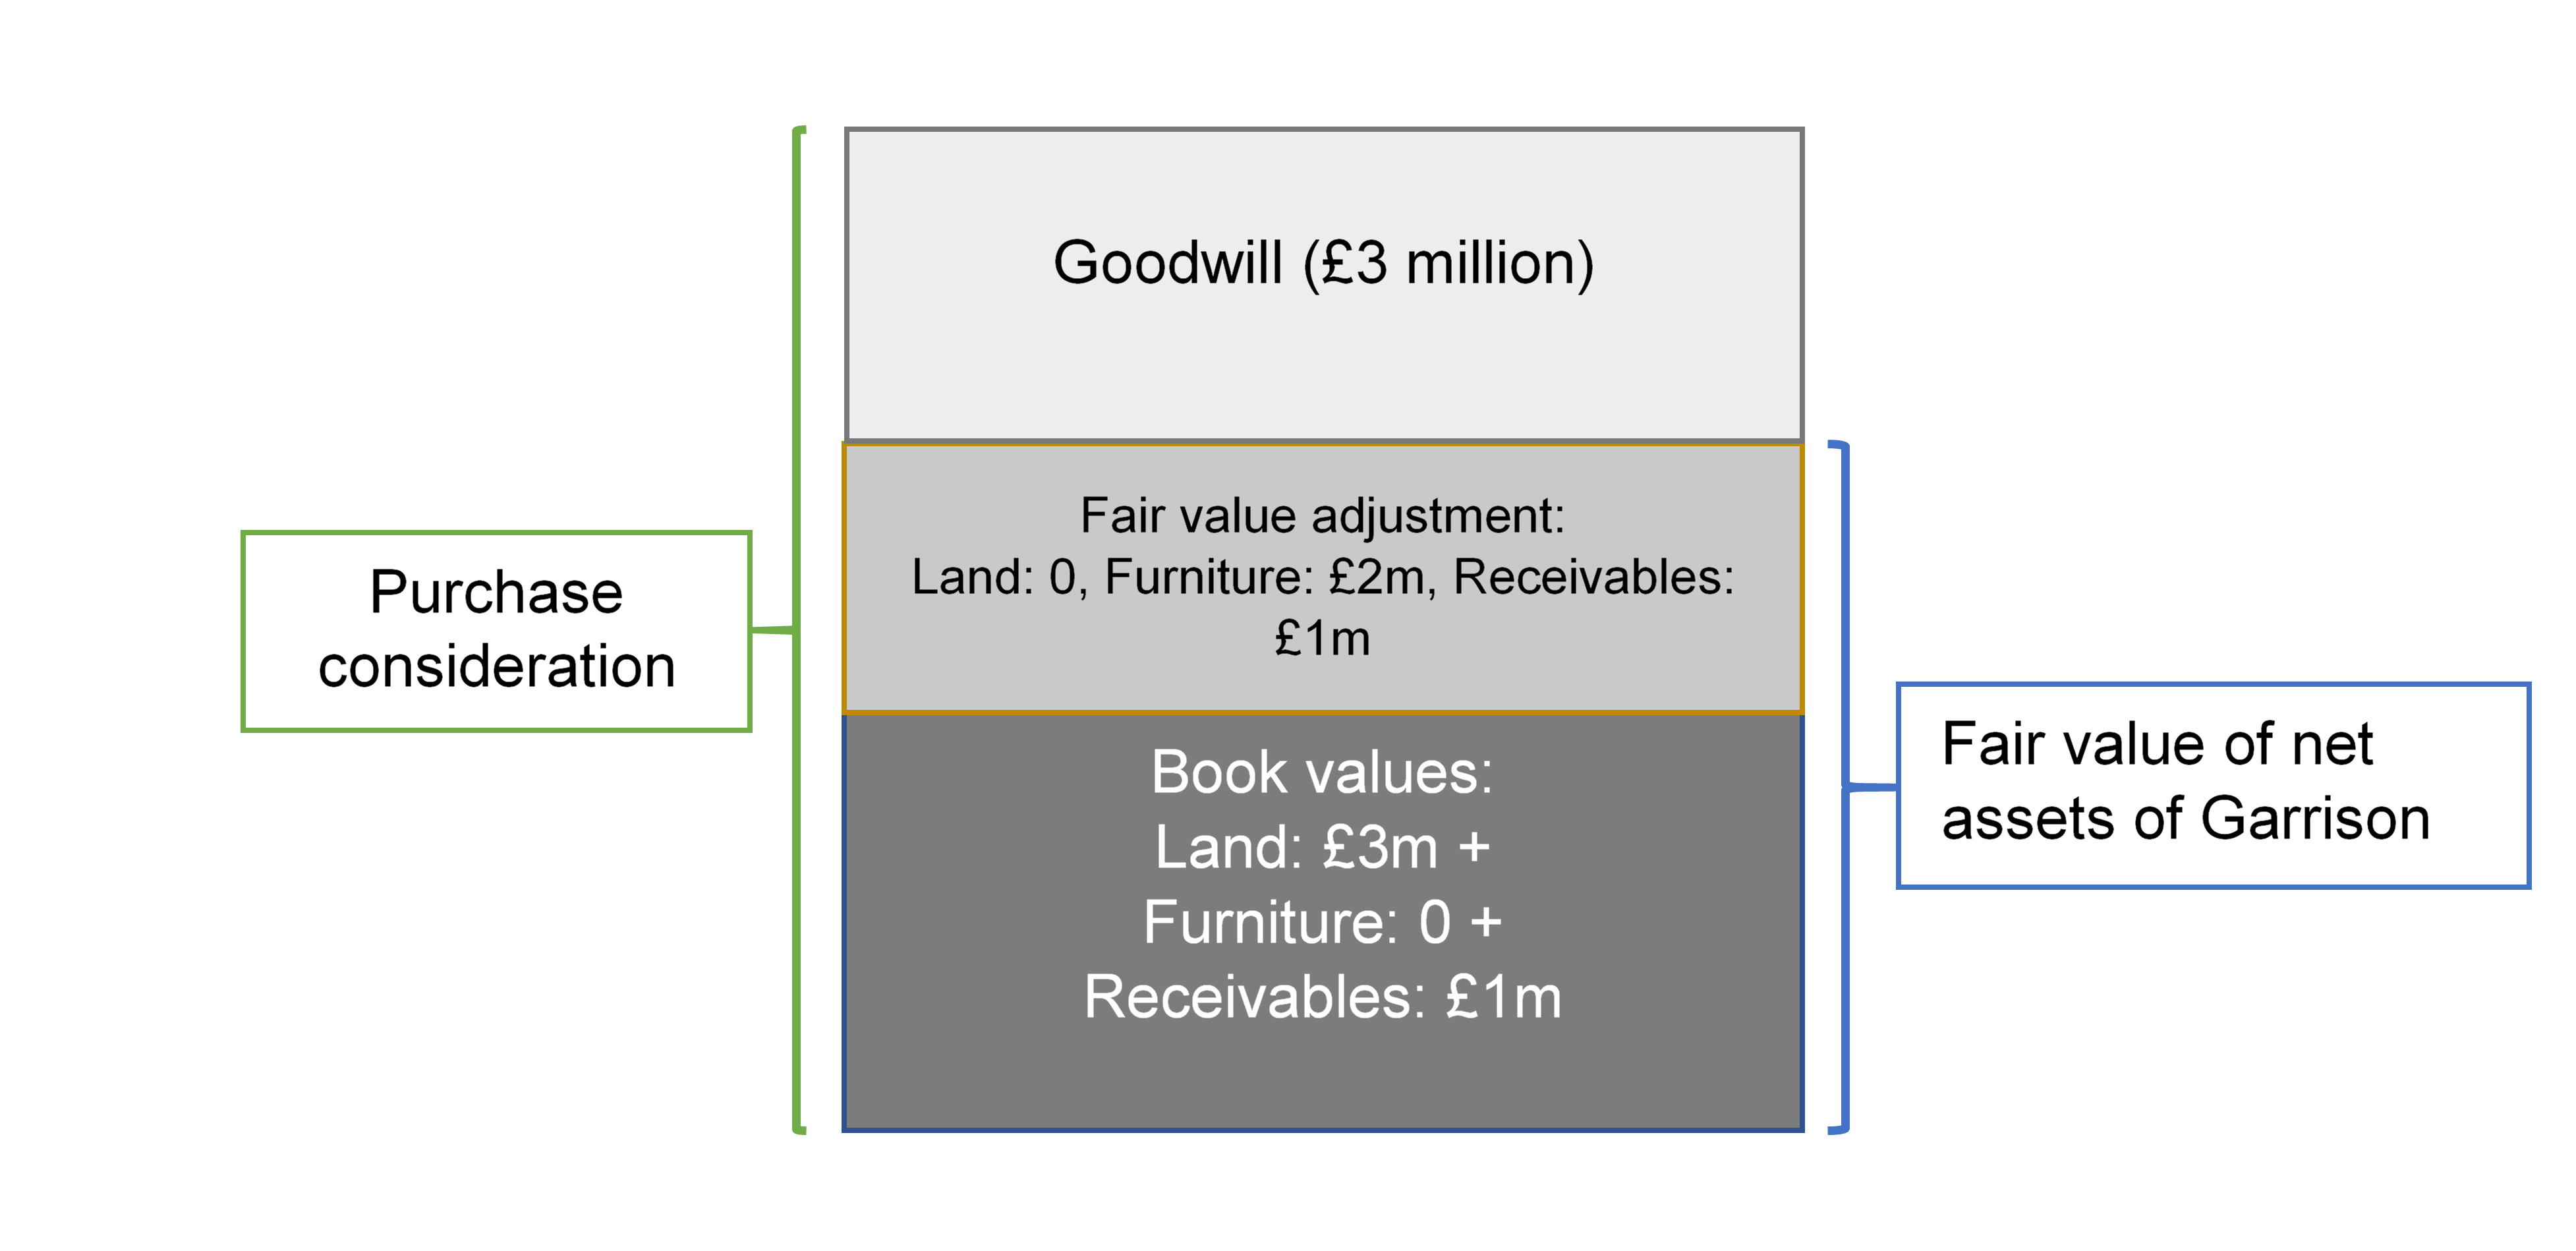 Goodwill Calculation and Allocation b/w Parent and NCI